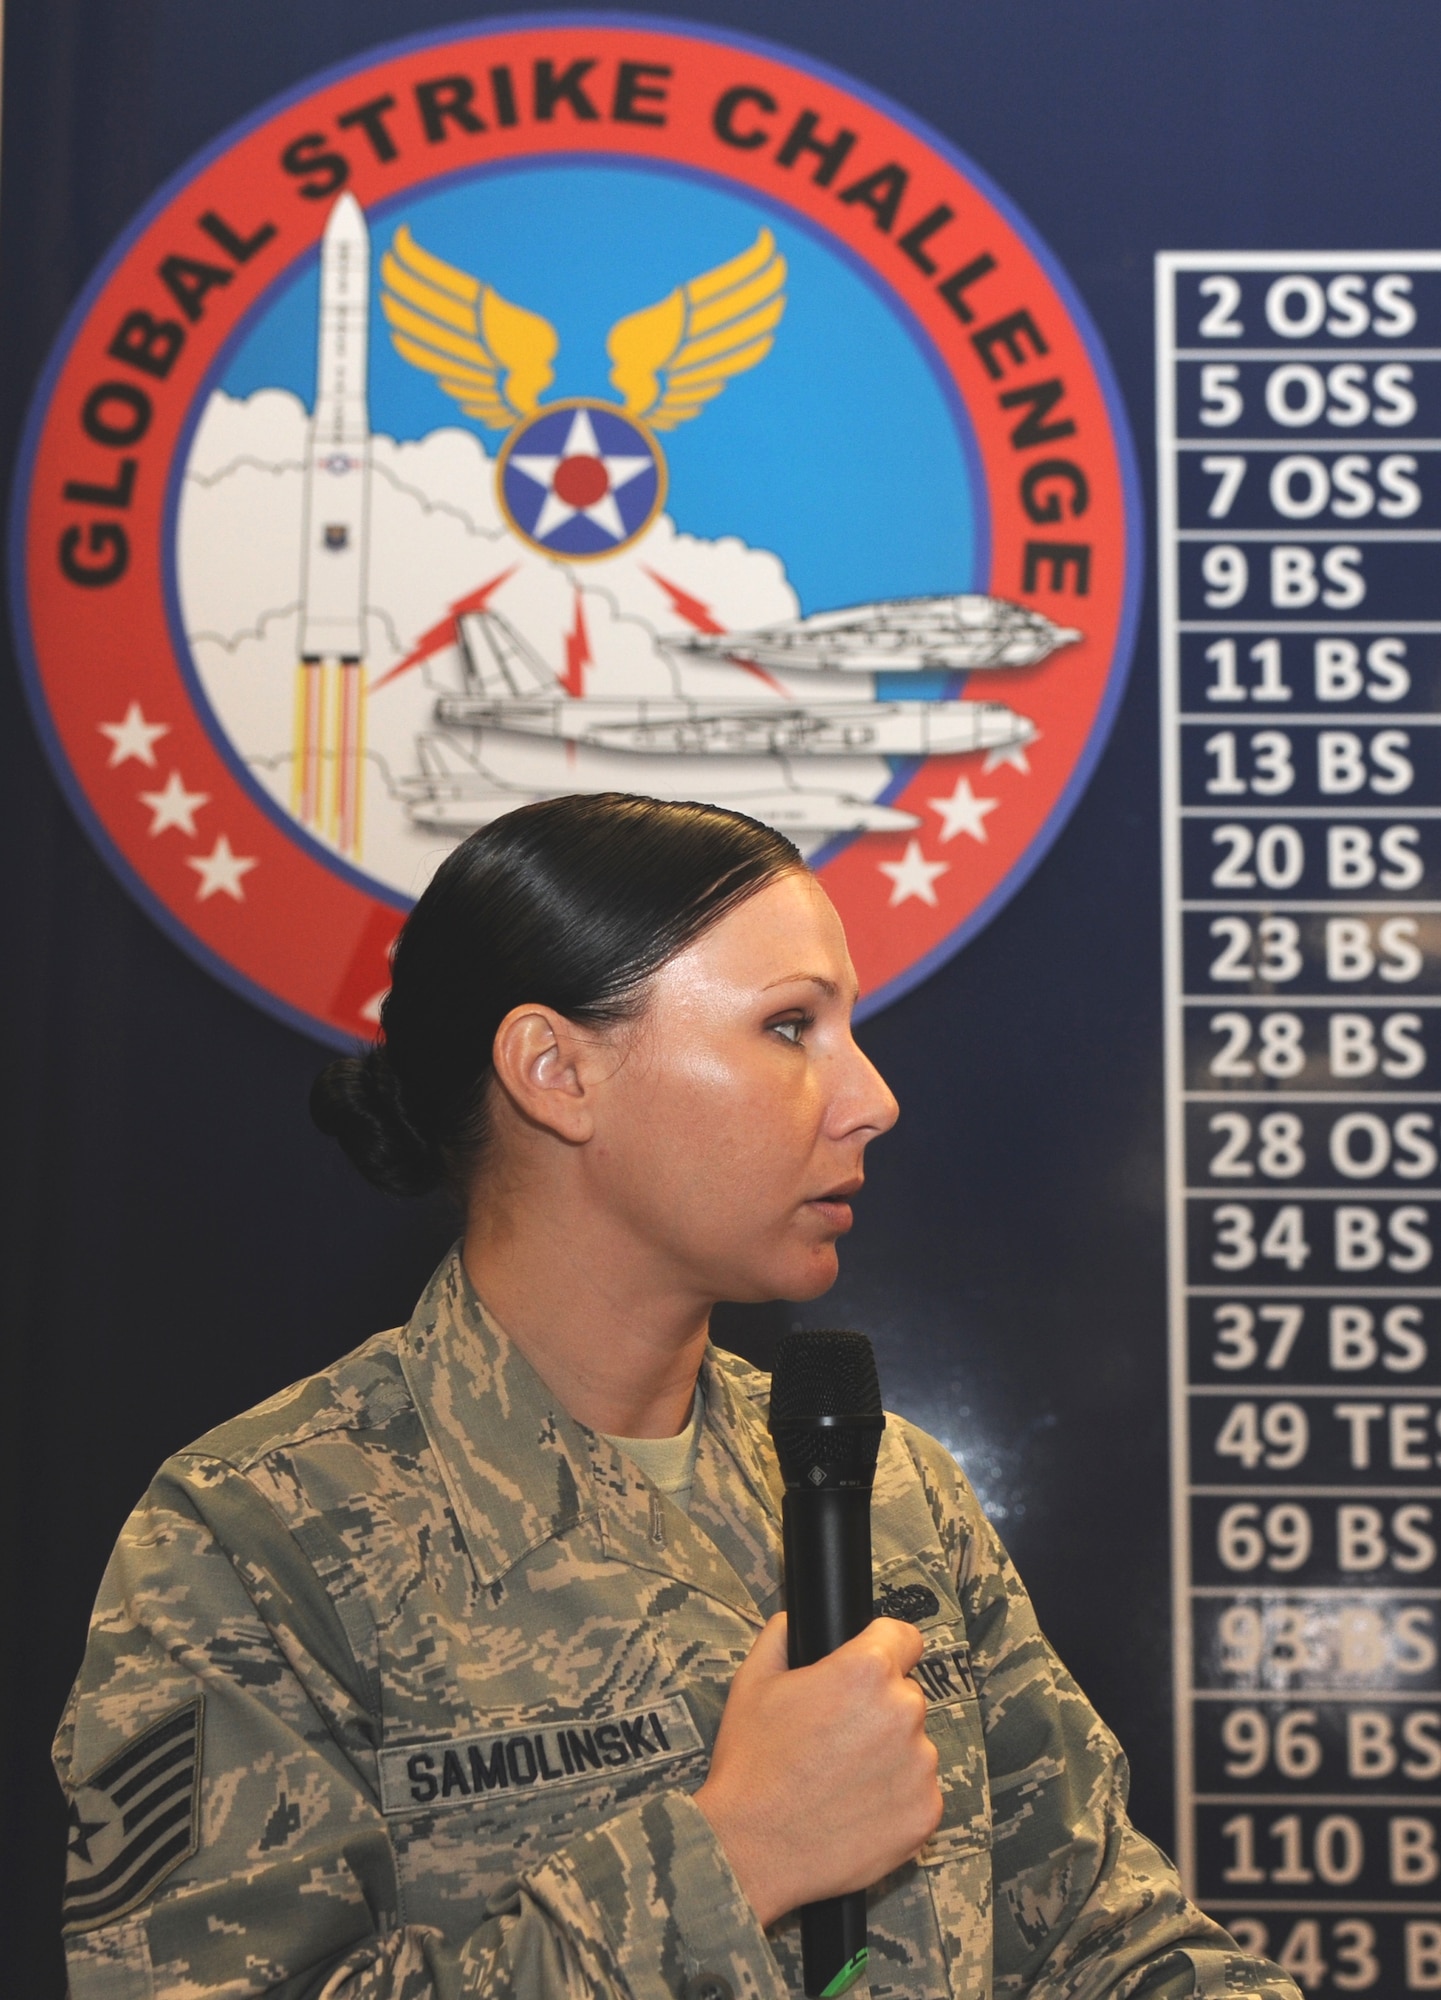 Tech. Sgt. Robin Samolinski, a spectrum manager with Air Force Global Strike Command's communications directorate, practices for her role as emcee for the Global Strike Challenge 2014 scoreposting ceremony. (U.S. Air Force photo by Airman 1st Class Joseph Raatz)